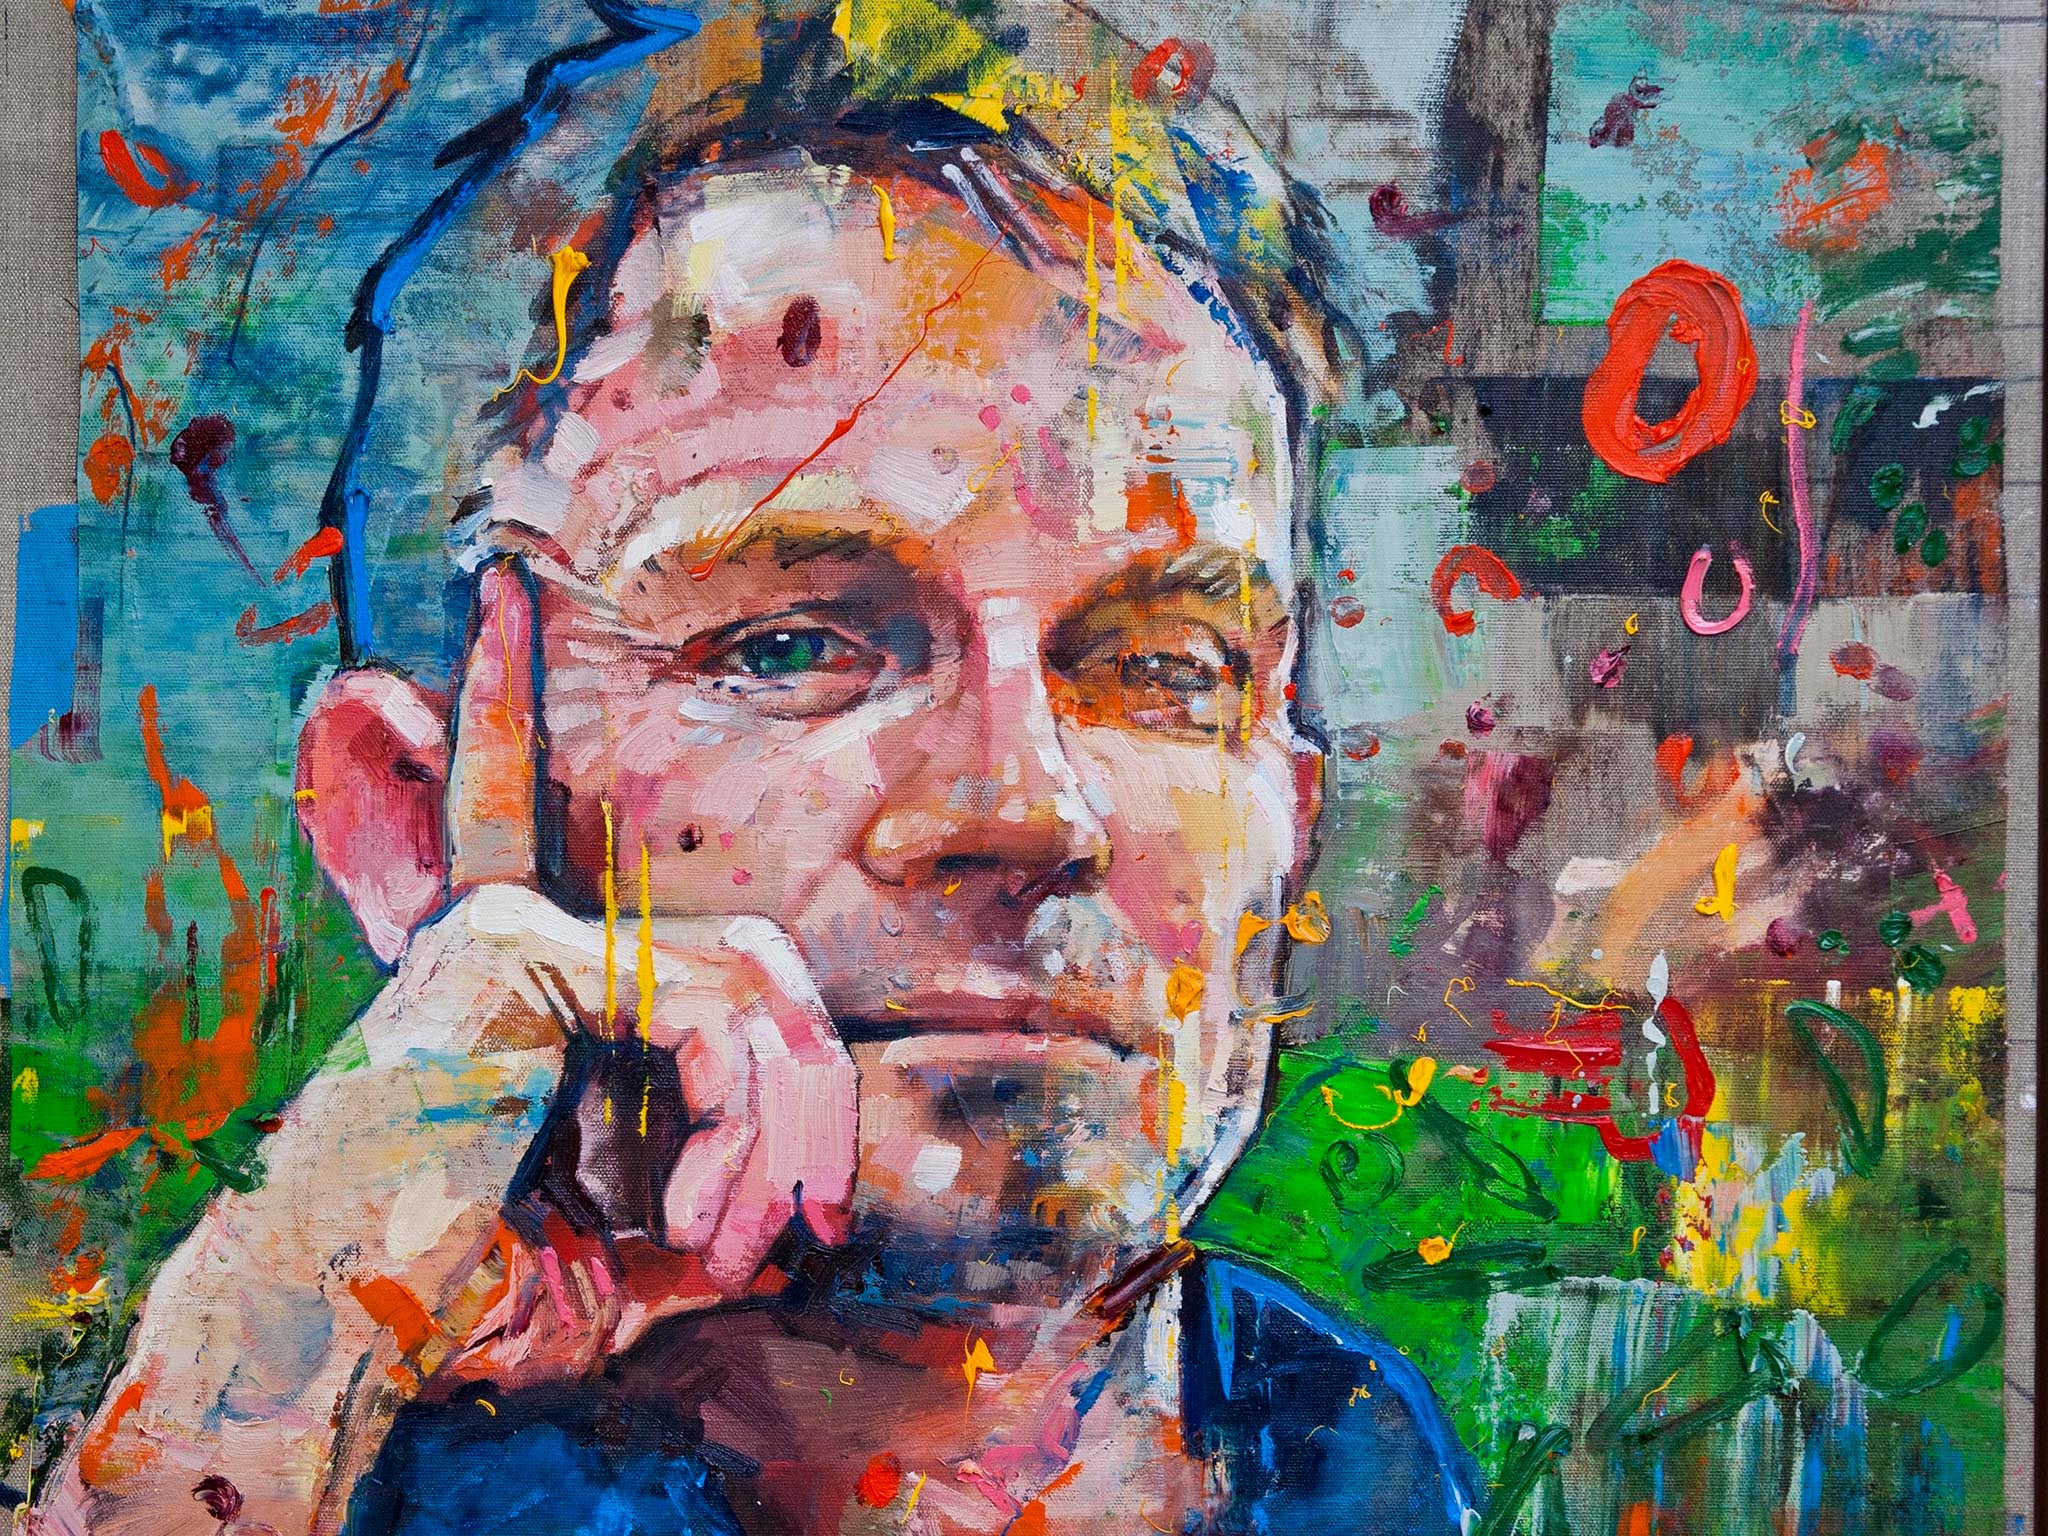 The portrait of Matt Cain, painted by Canadian Andrew Salgado